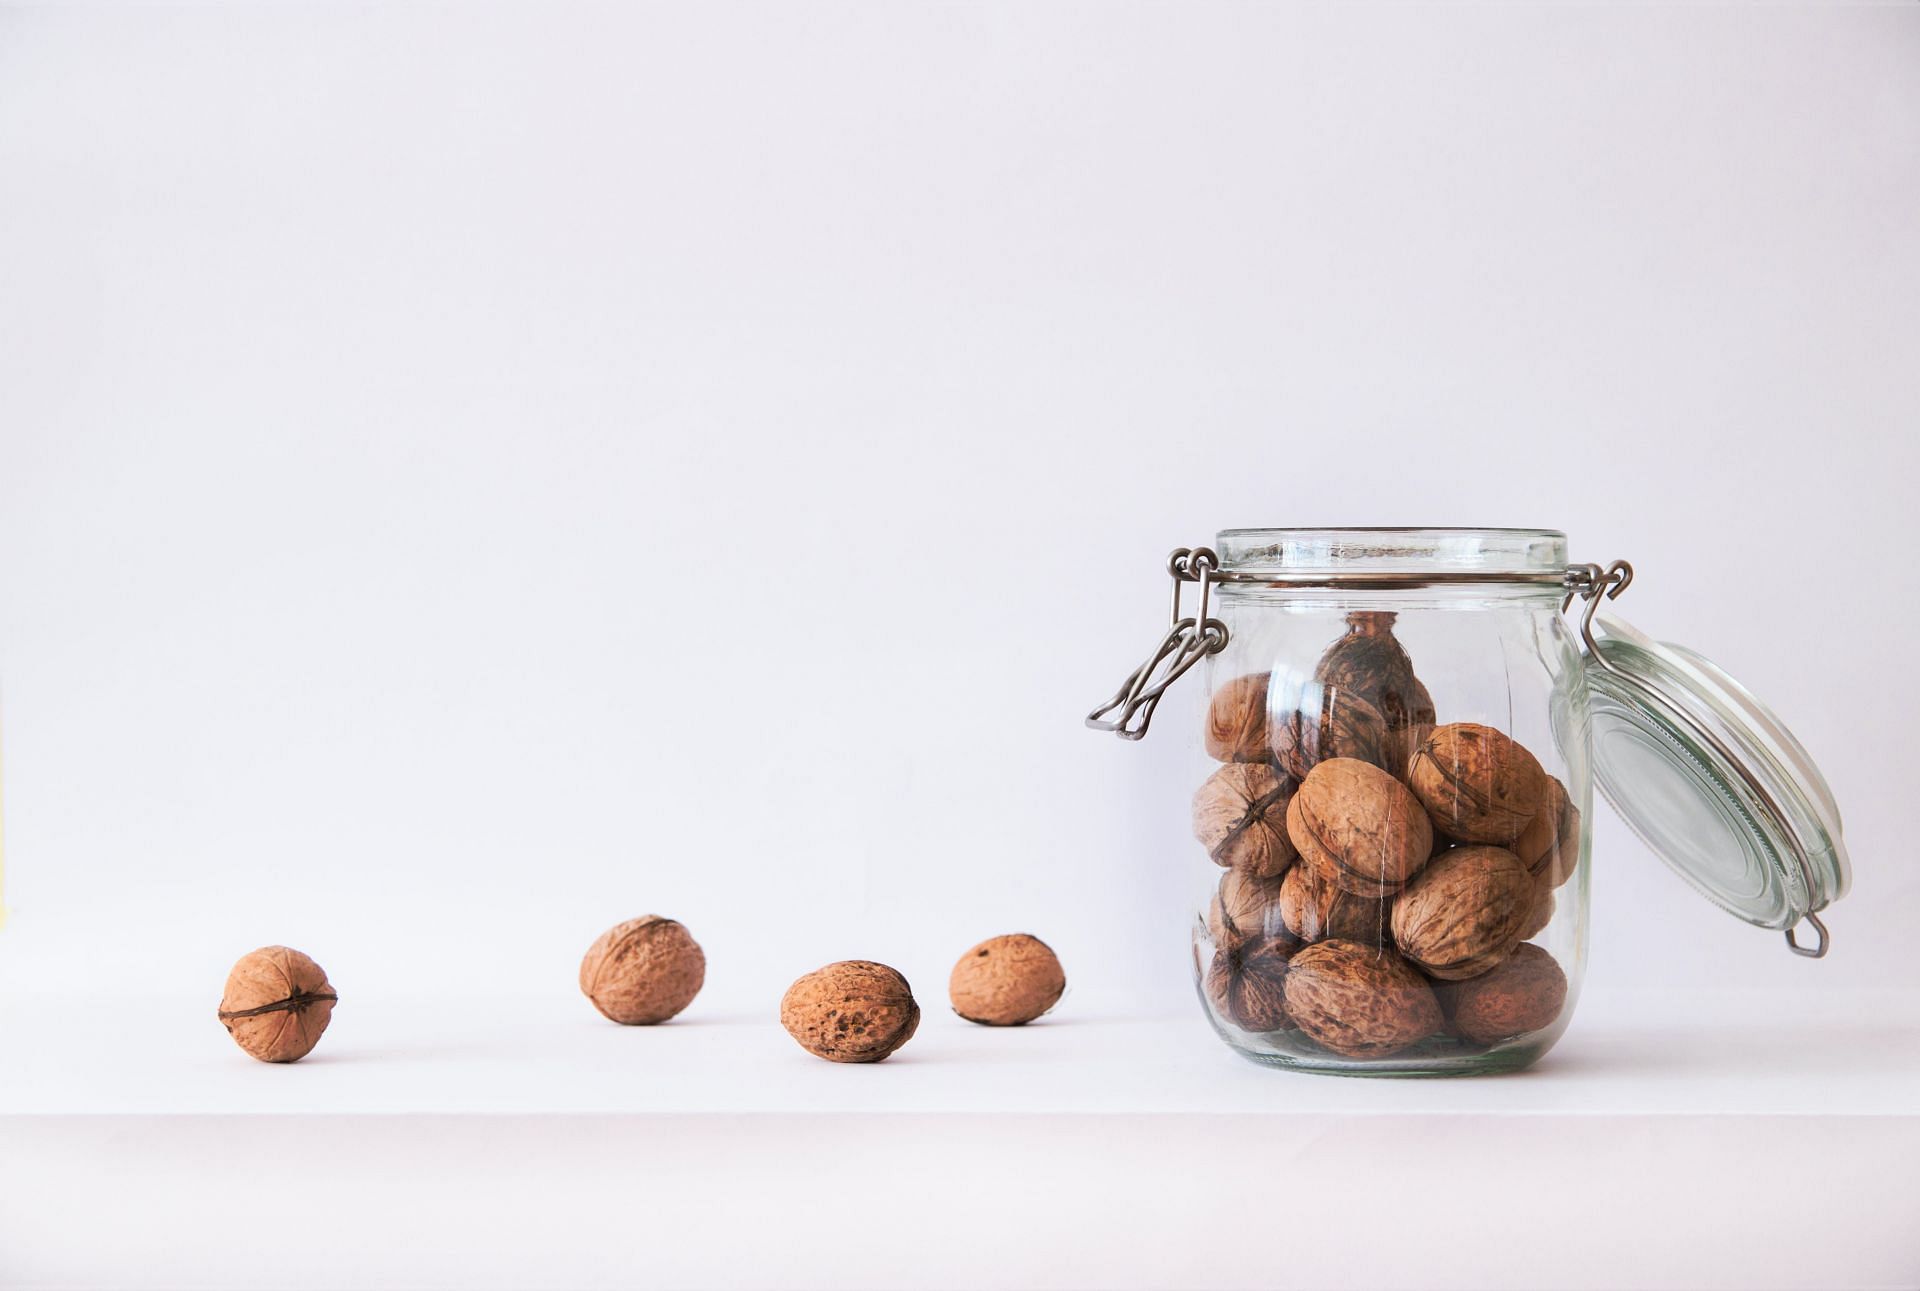 Walnuts for youthful skin (image sourced via Pexels / Photo by Andreea)